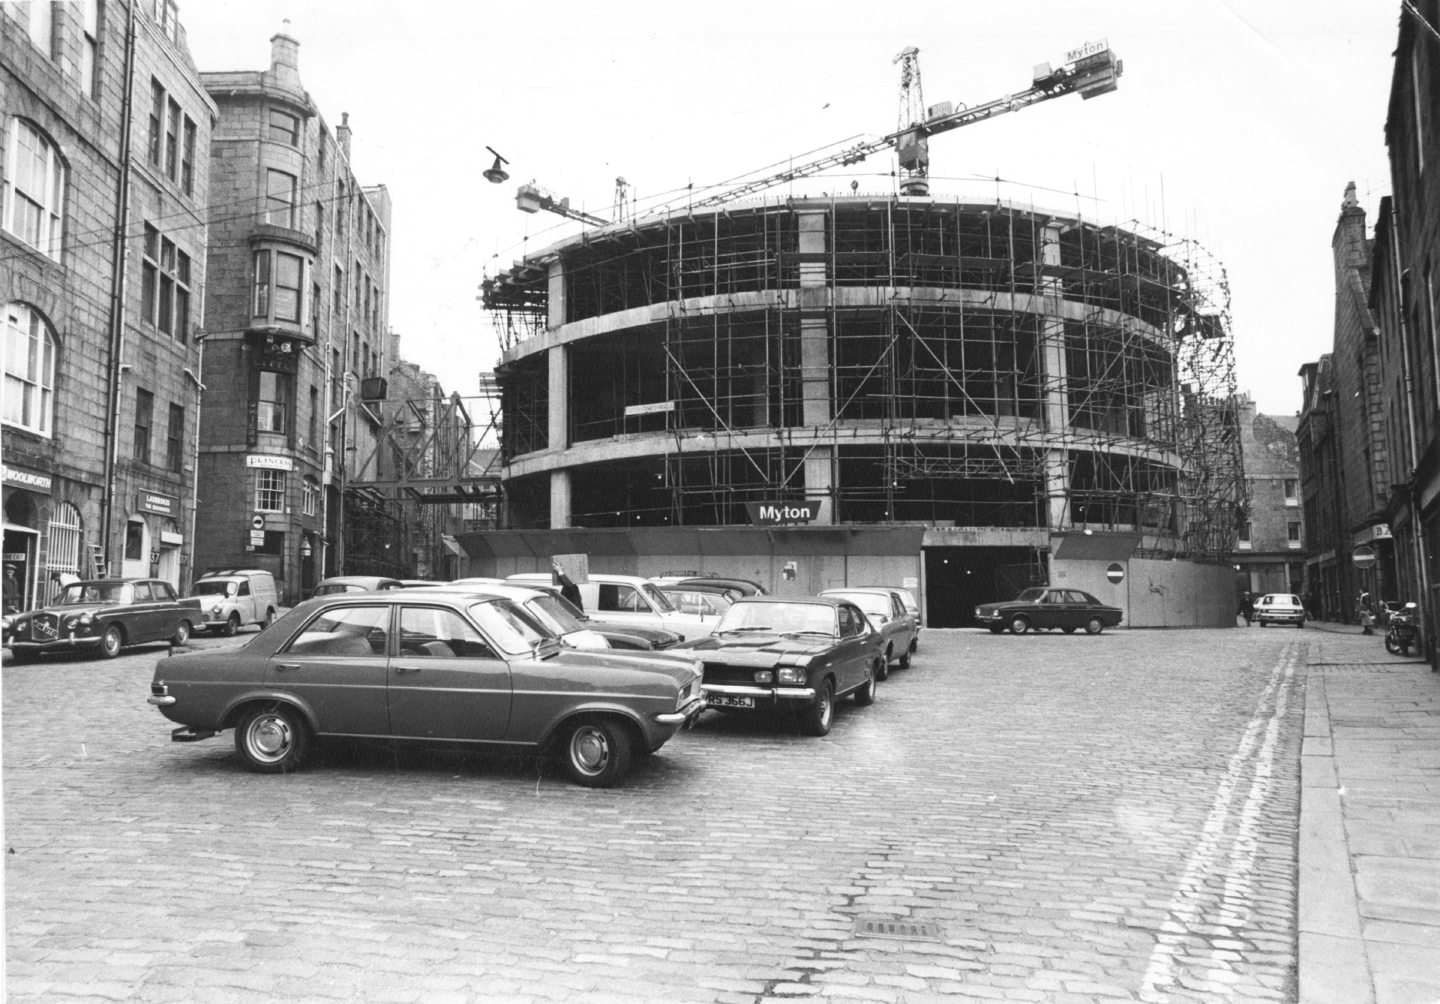 View from the Green of the New Market building, showing the circular shape of the building at that end in March 1973.